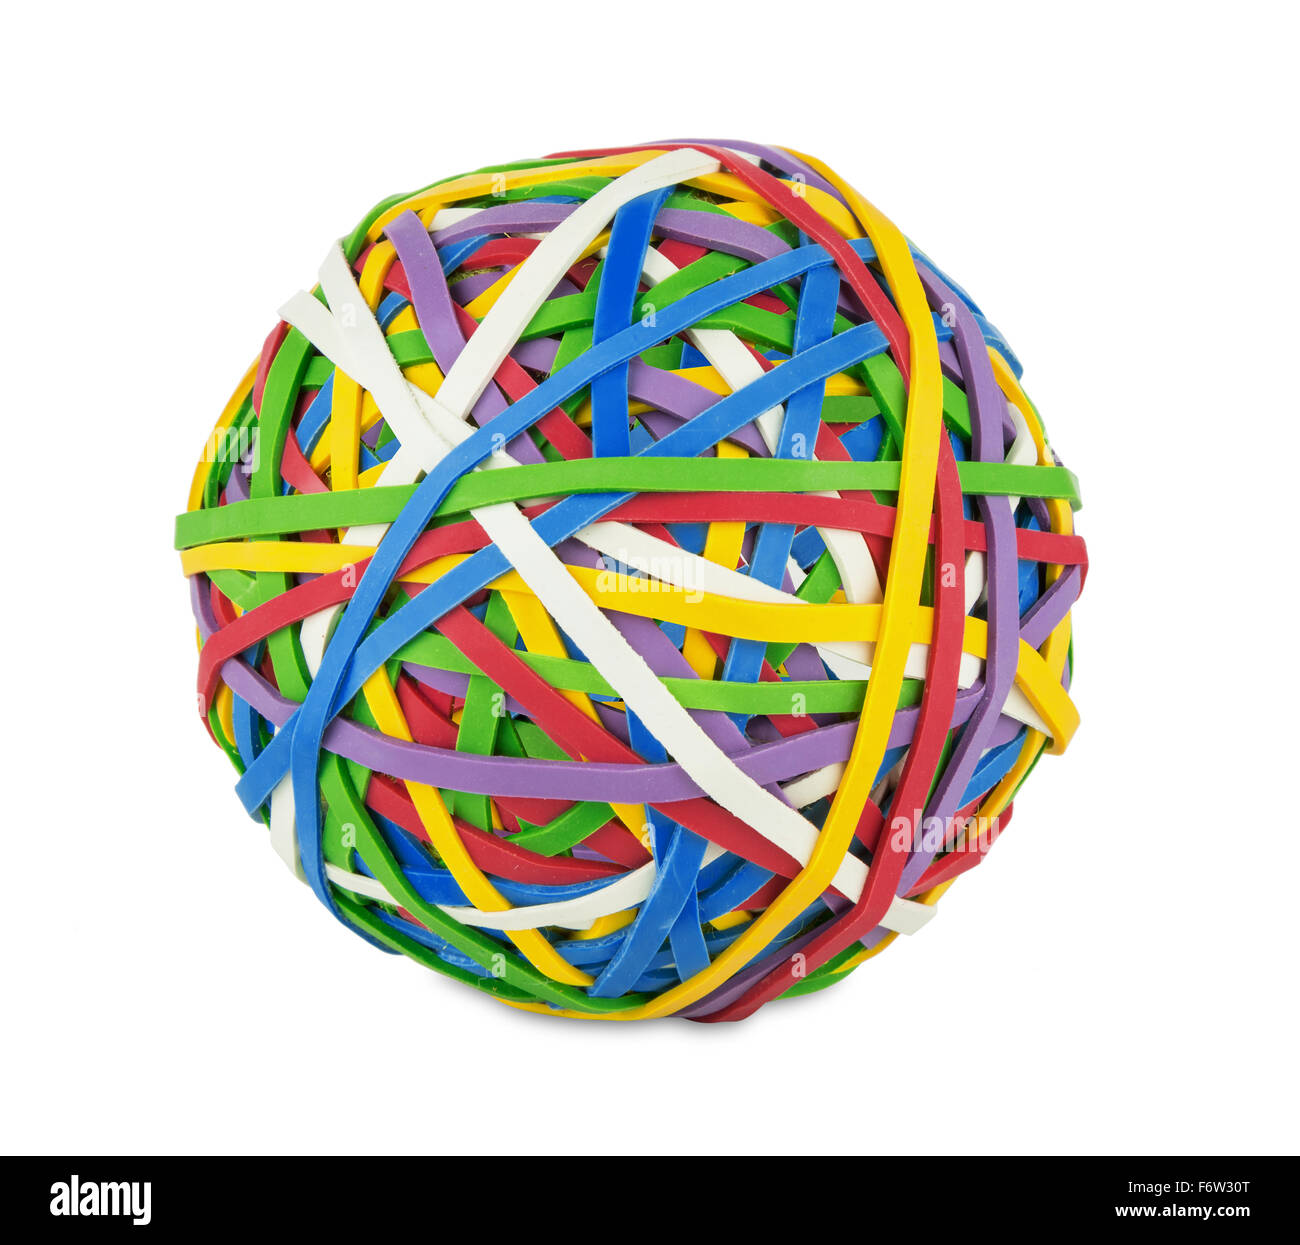 rubber ball out of many colorful elastic bands on white background Stock Photo